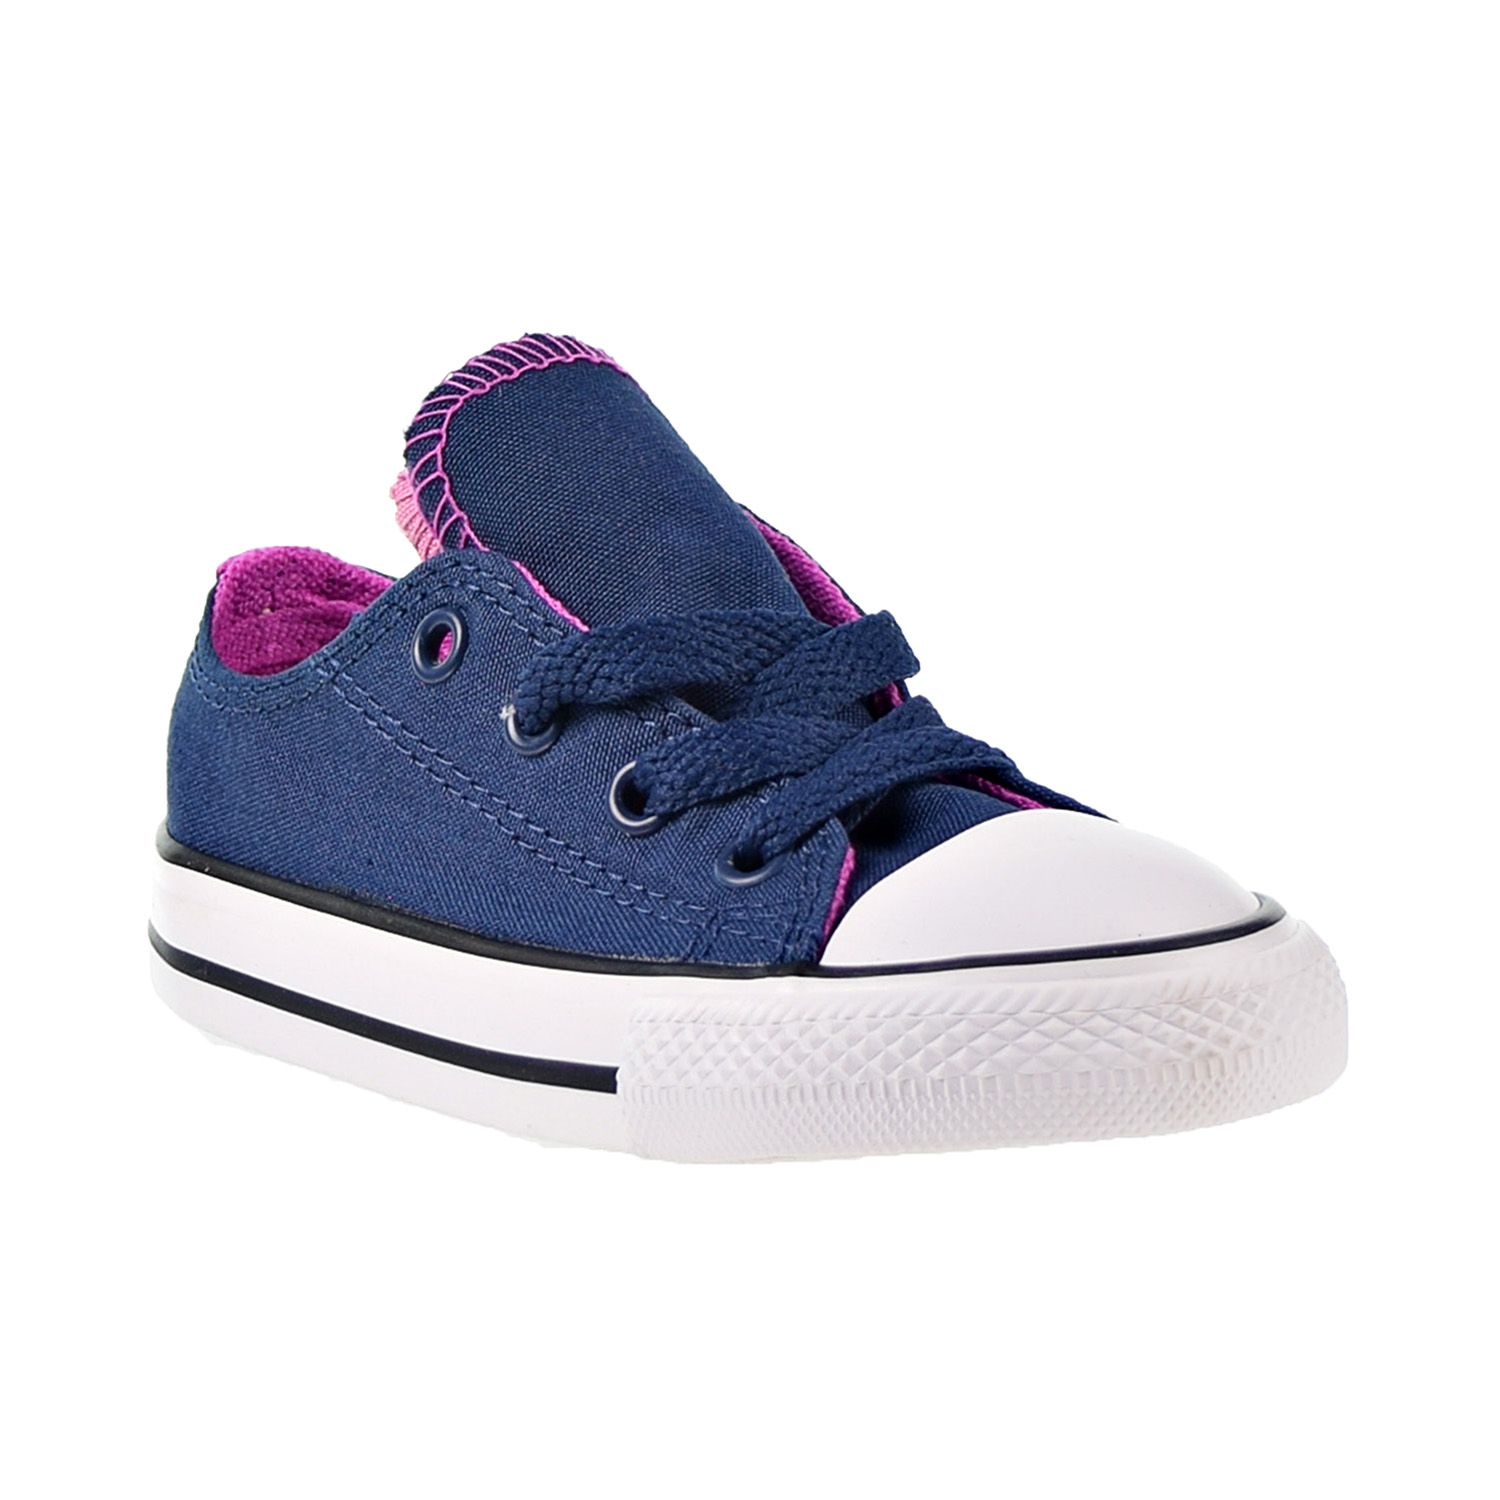 Converse Chuck Taylor All Star Double Toddler OX Toddler's Shoes Navy 760001f - image 2 of 6